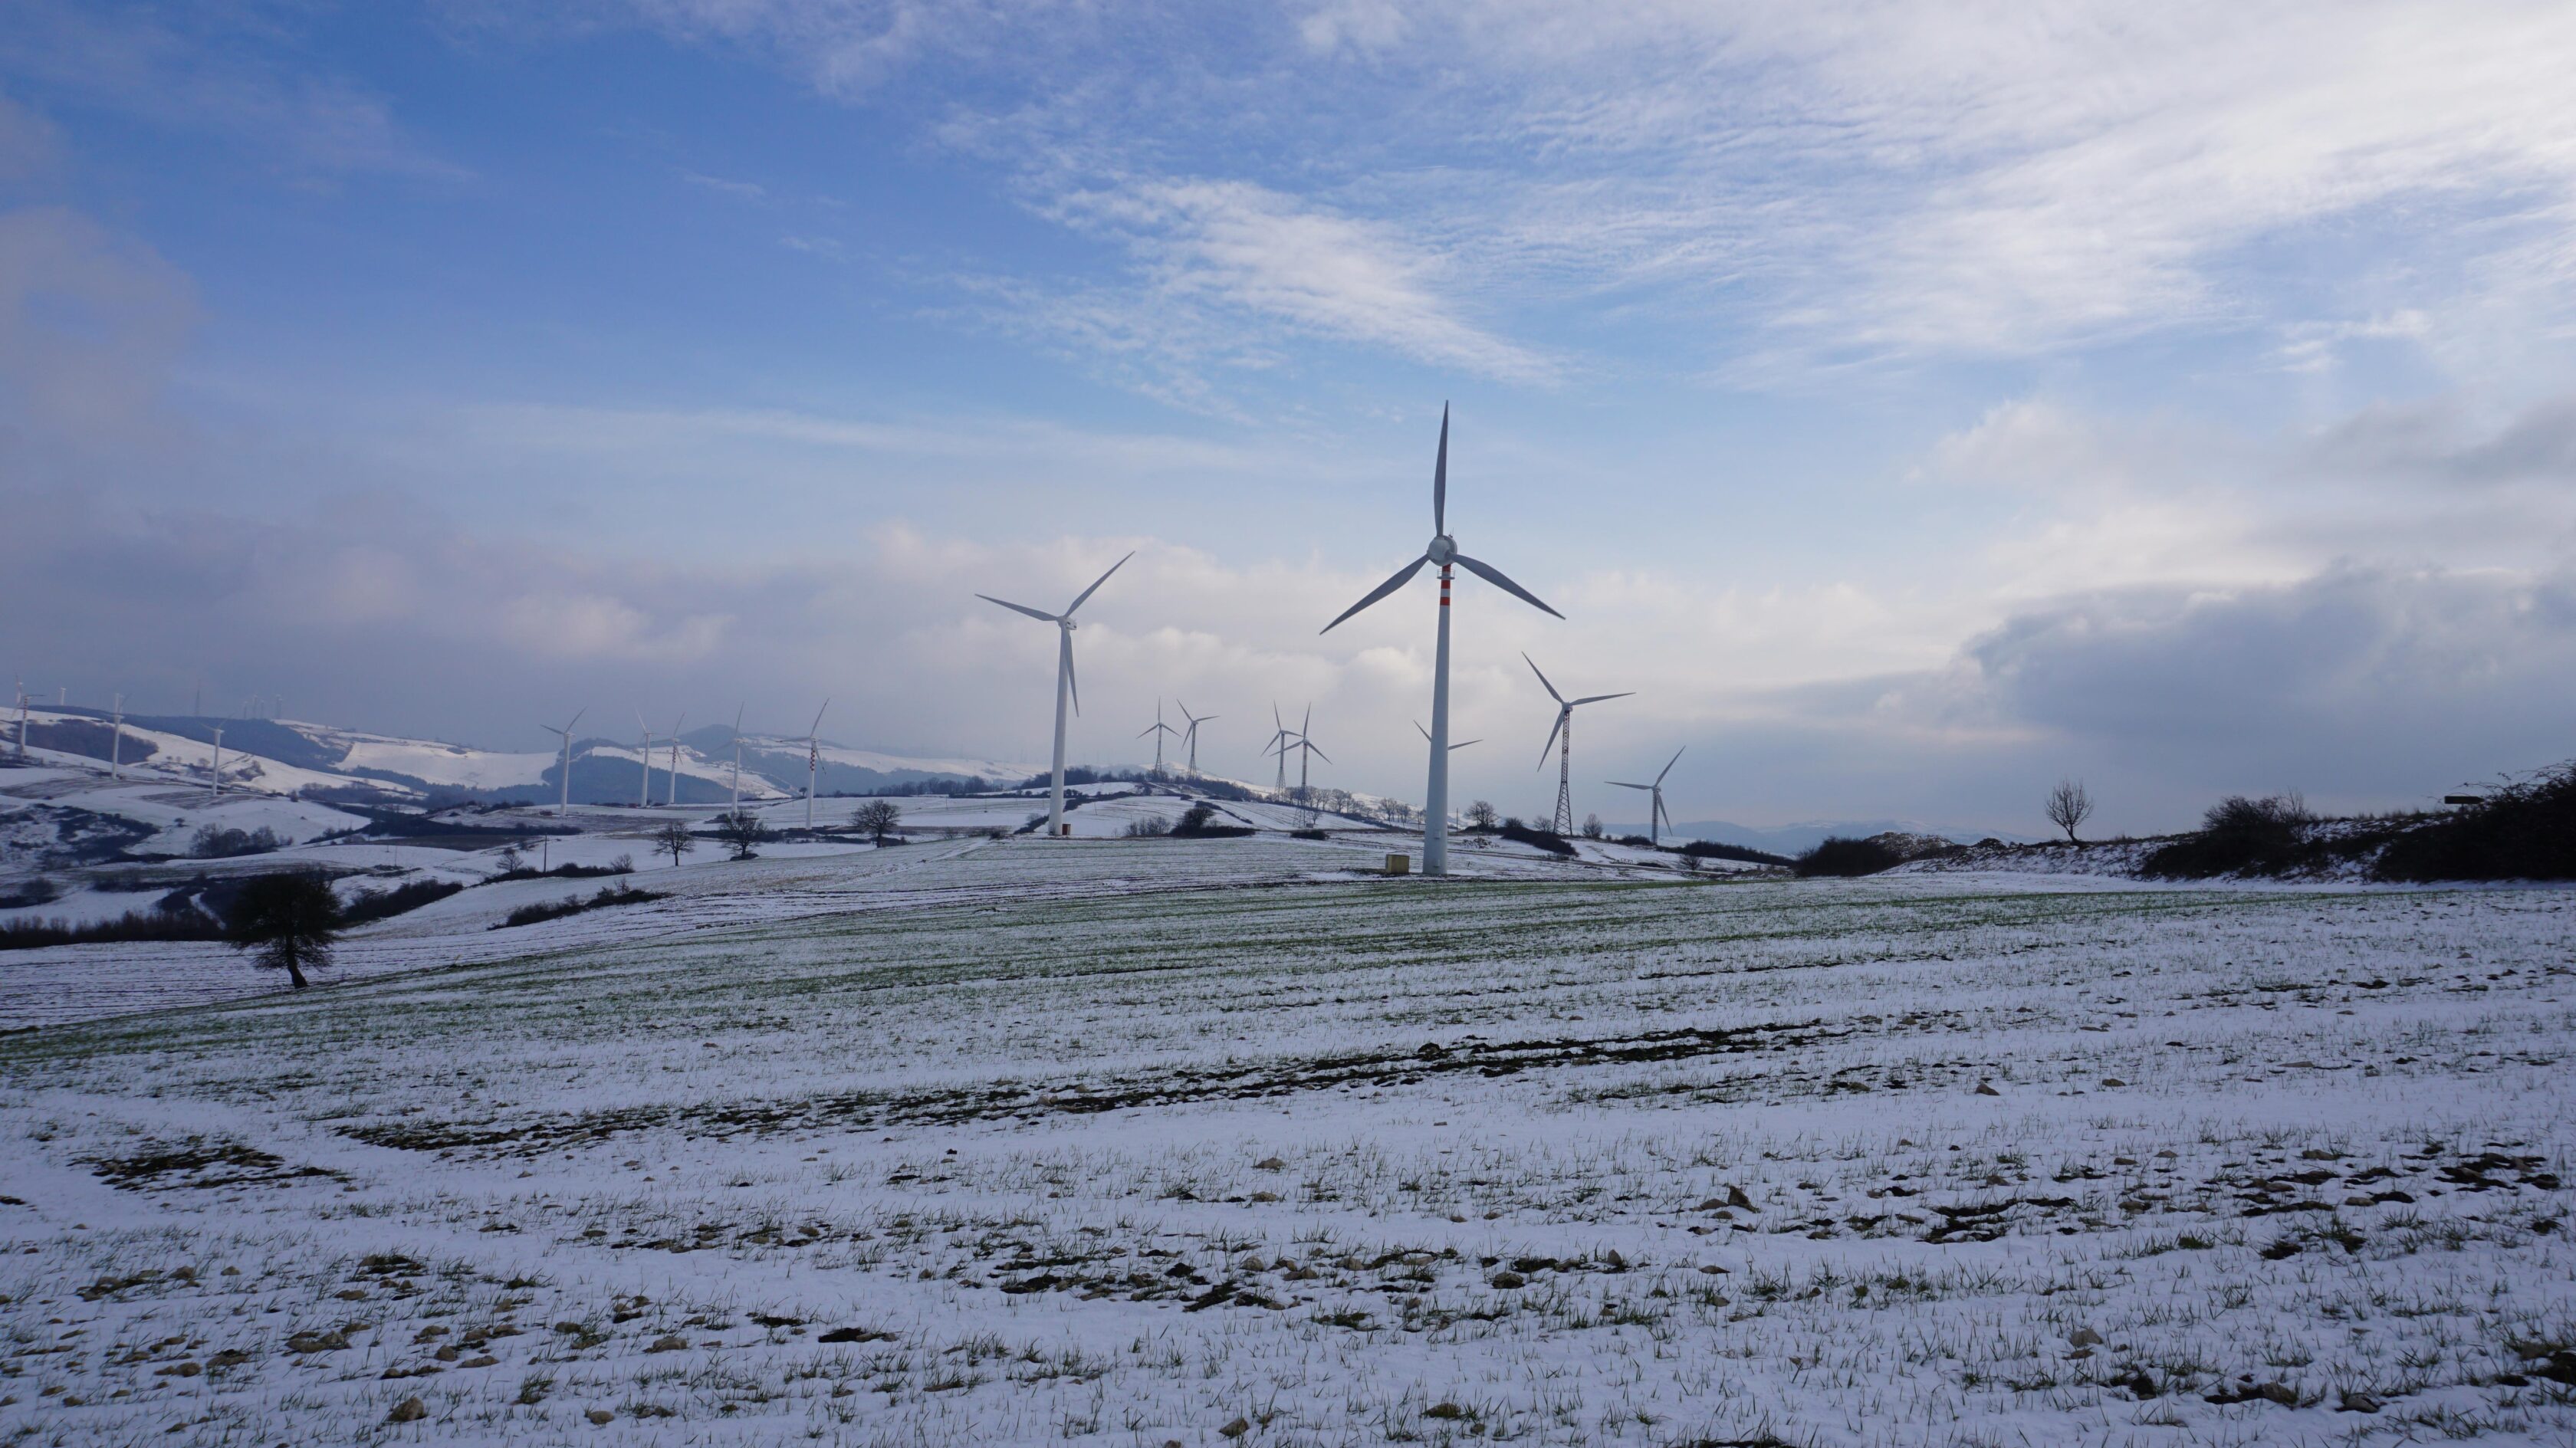 View of the Edison wind fram at Volturino (FG), Italy